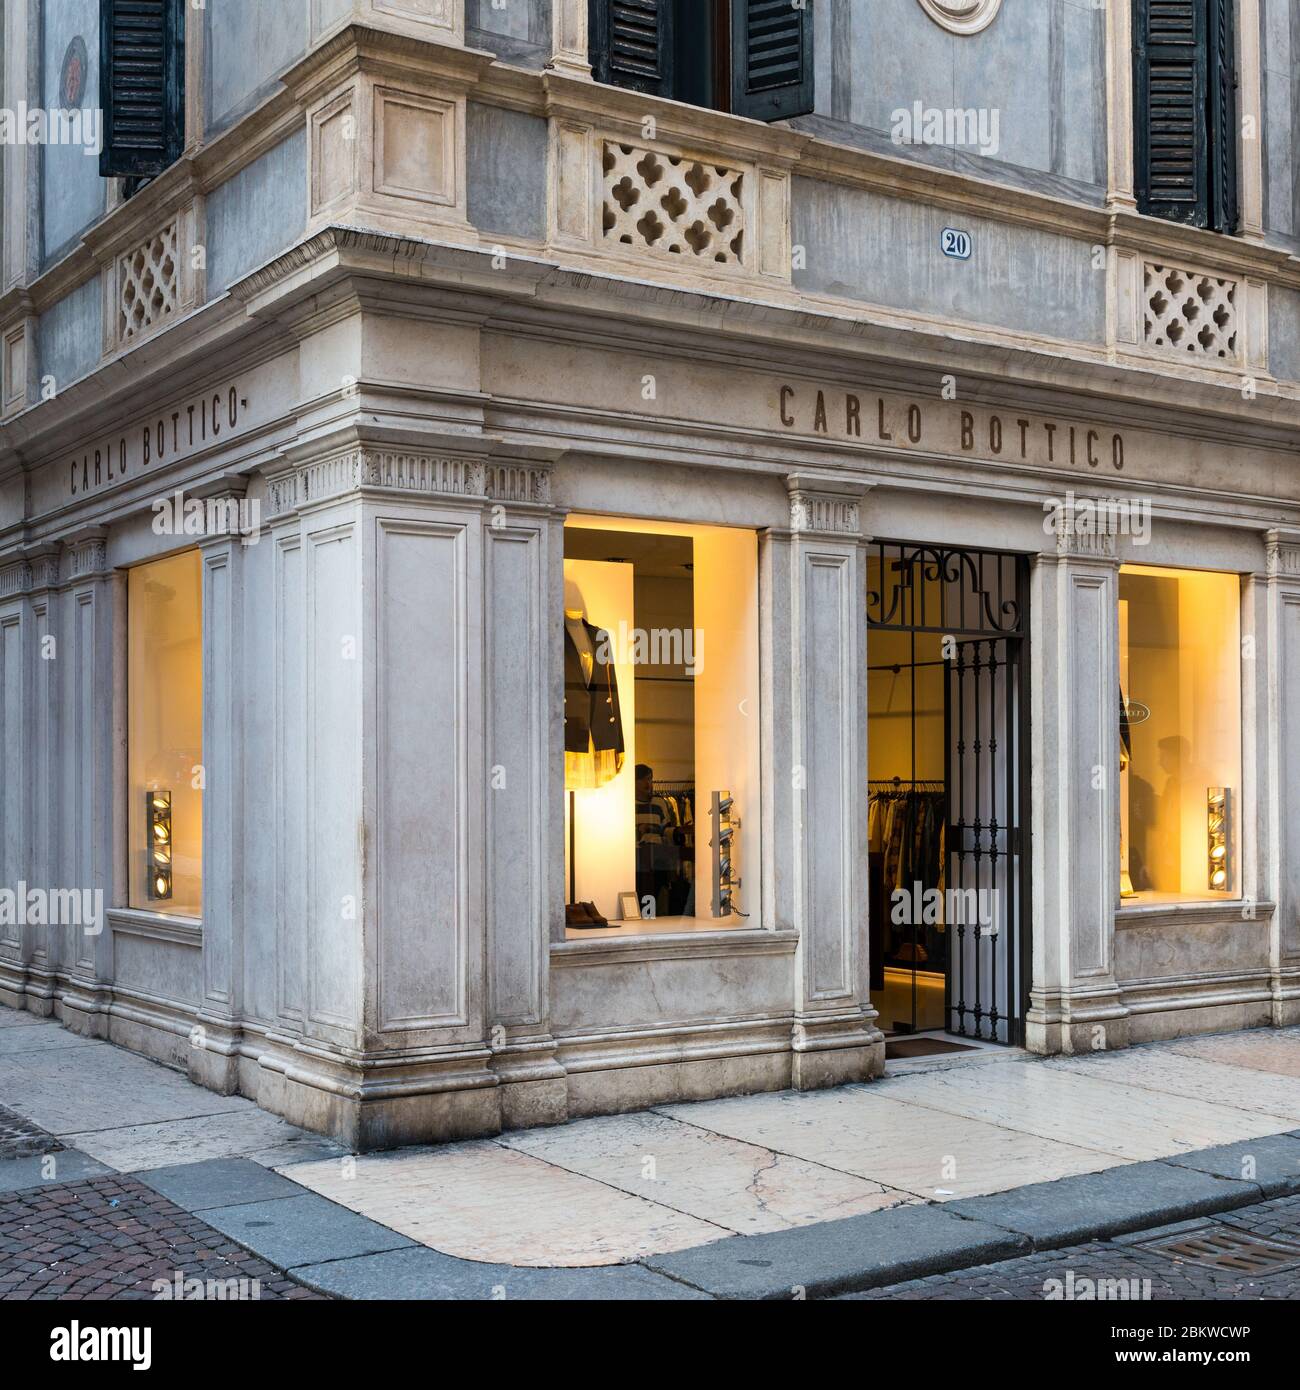 VERONA, ITALY - 14, MARCH, 2018: Vertical picture of beautiful architecture clothing store located in Verona, Italy Stock Photo